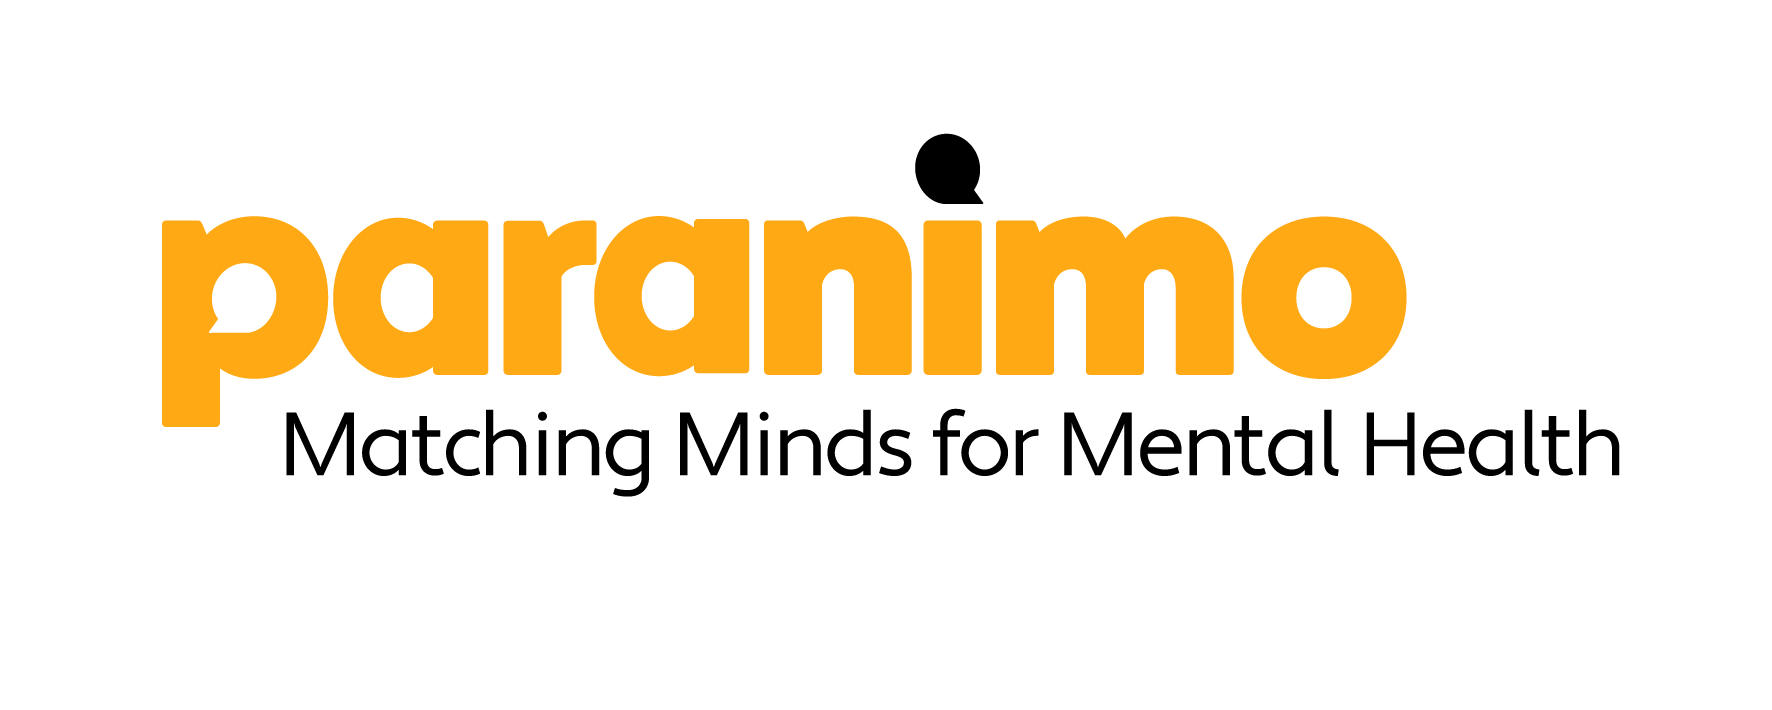 Matching Minds for Mental Health; technology startup ‘Paranimo’ is changing the way mental health is accessed and delivered across the UK.